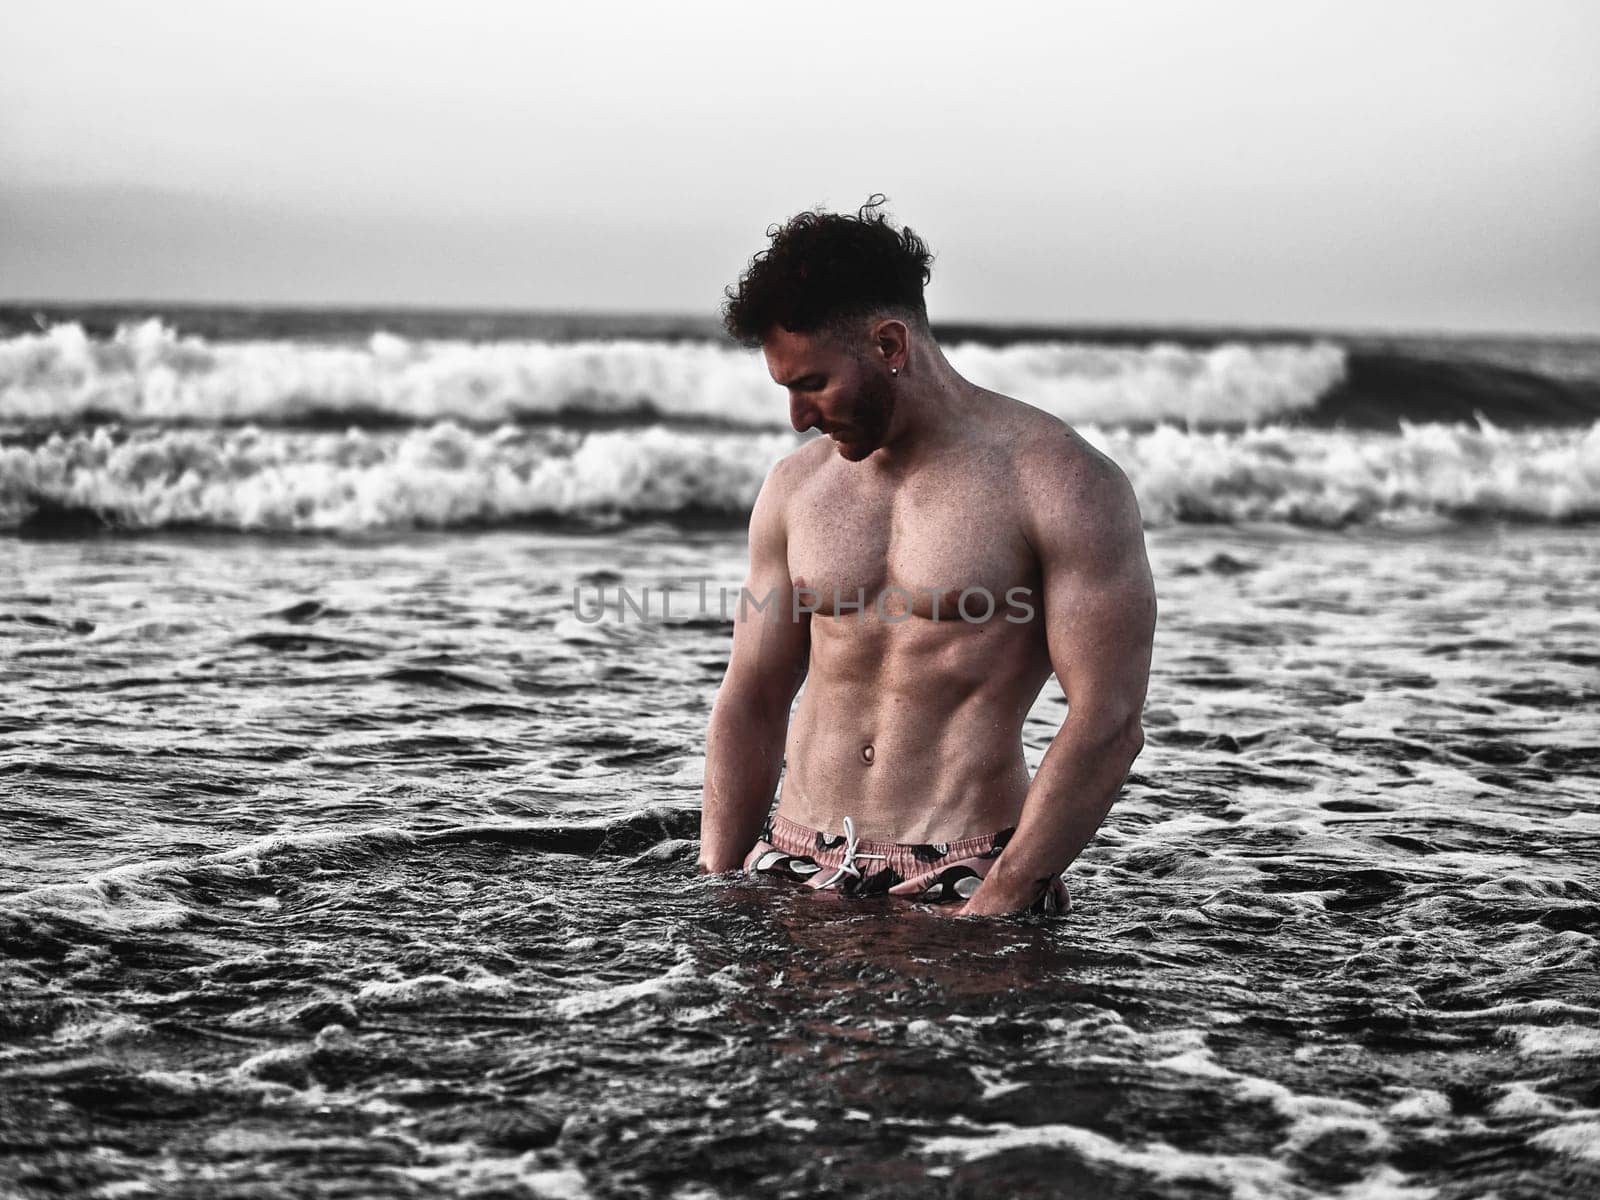 Handsome, hot young bodybuilder in the sea showing his muscular torso and arms - Muscular and fit young bodybuilder in the sea